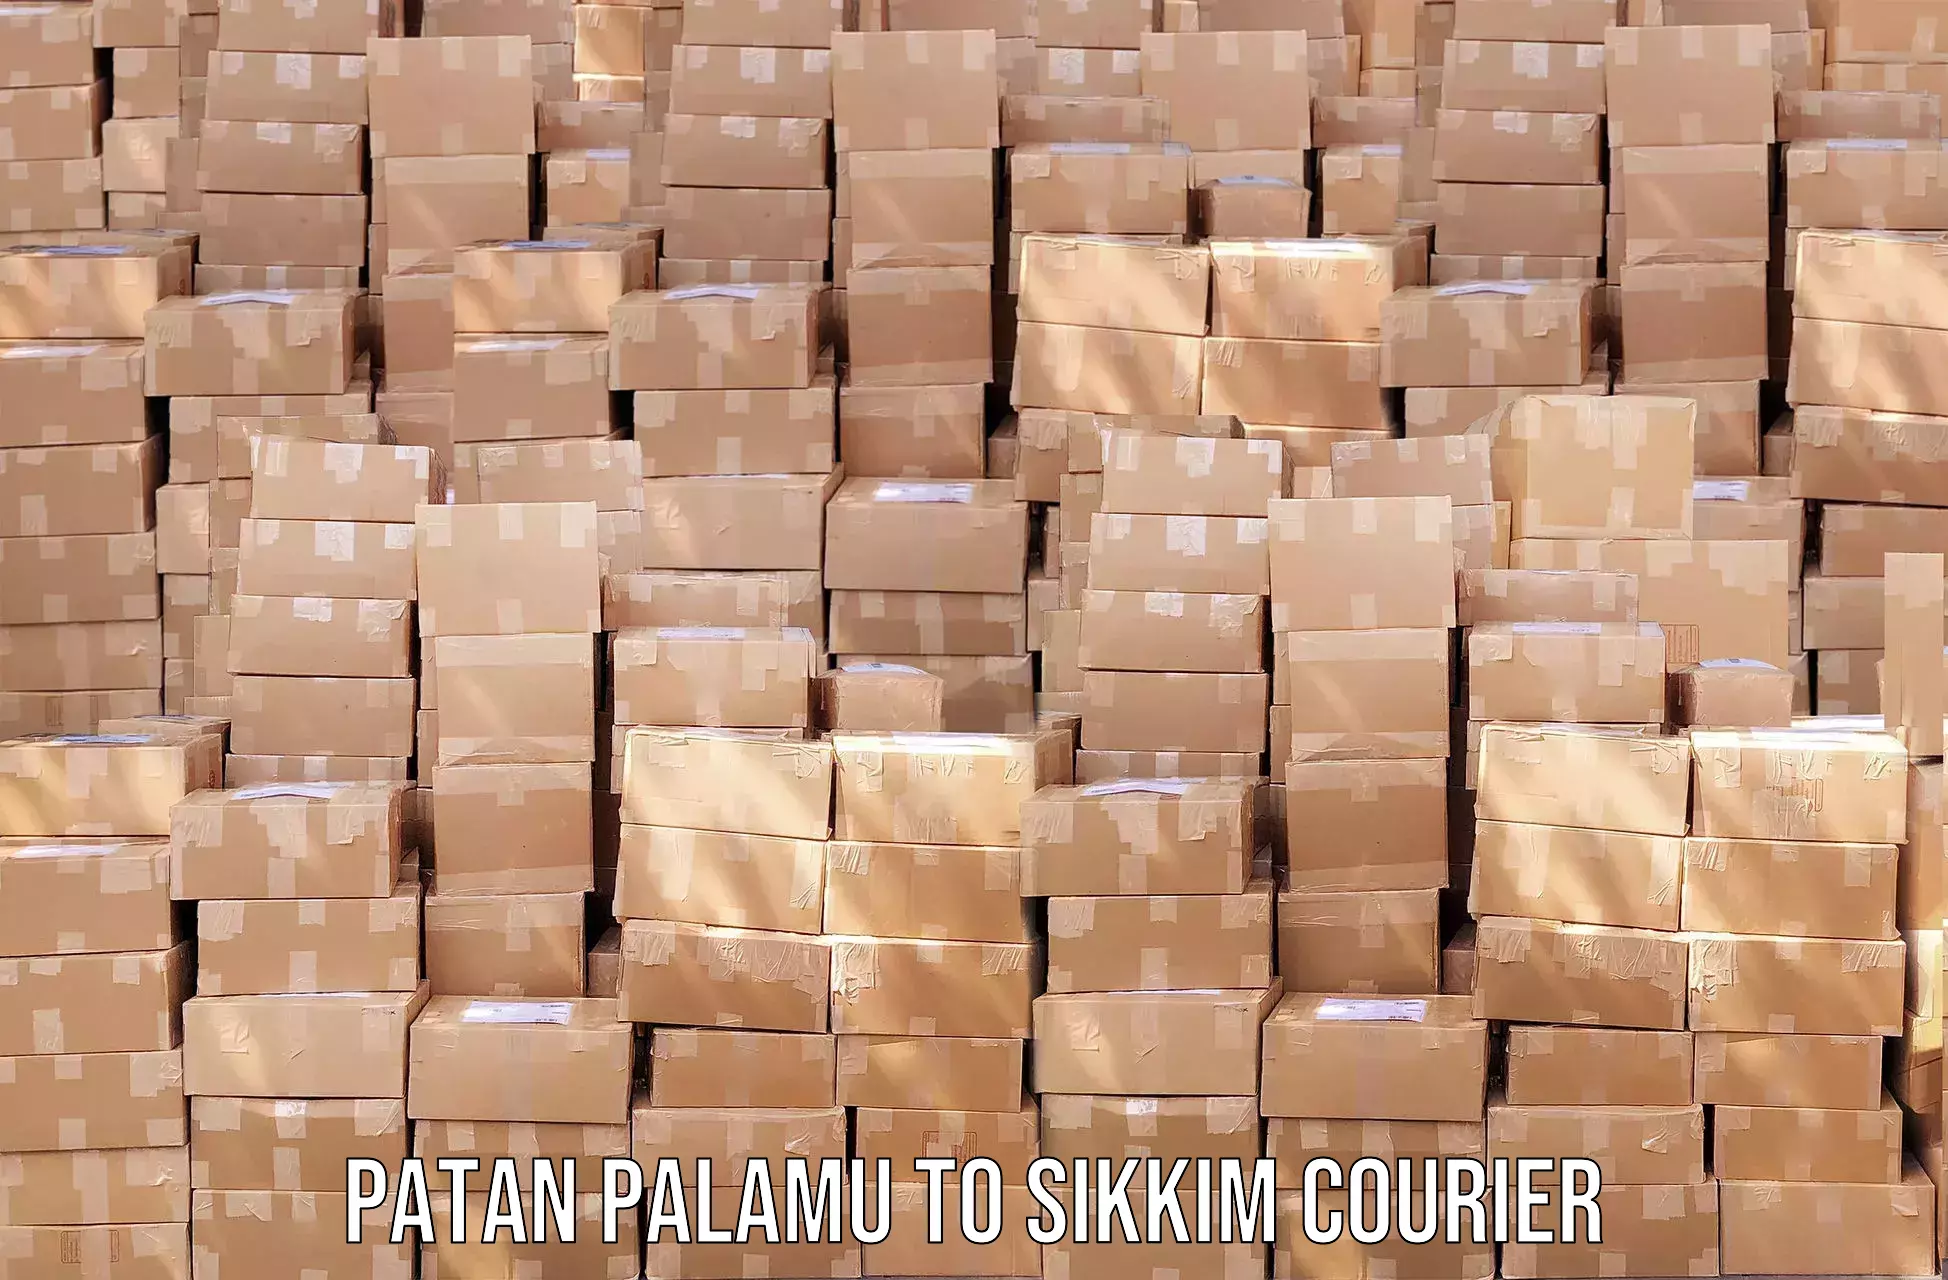 Efficient order fulfillment in Patan Palamu to Sikkim